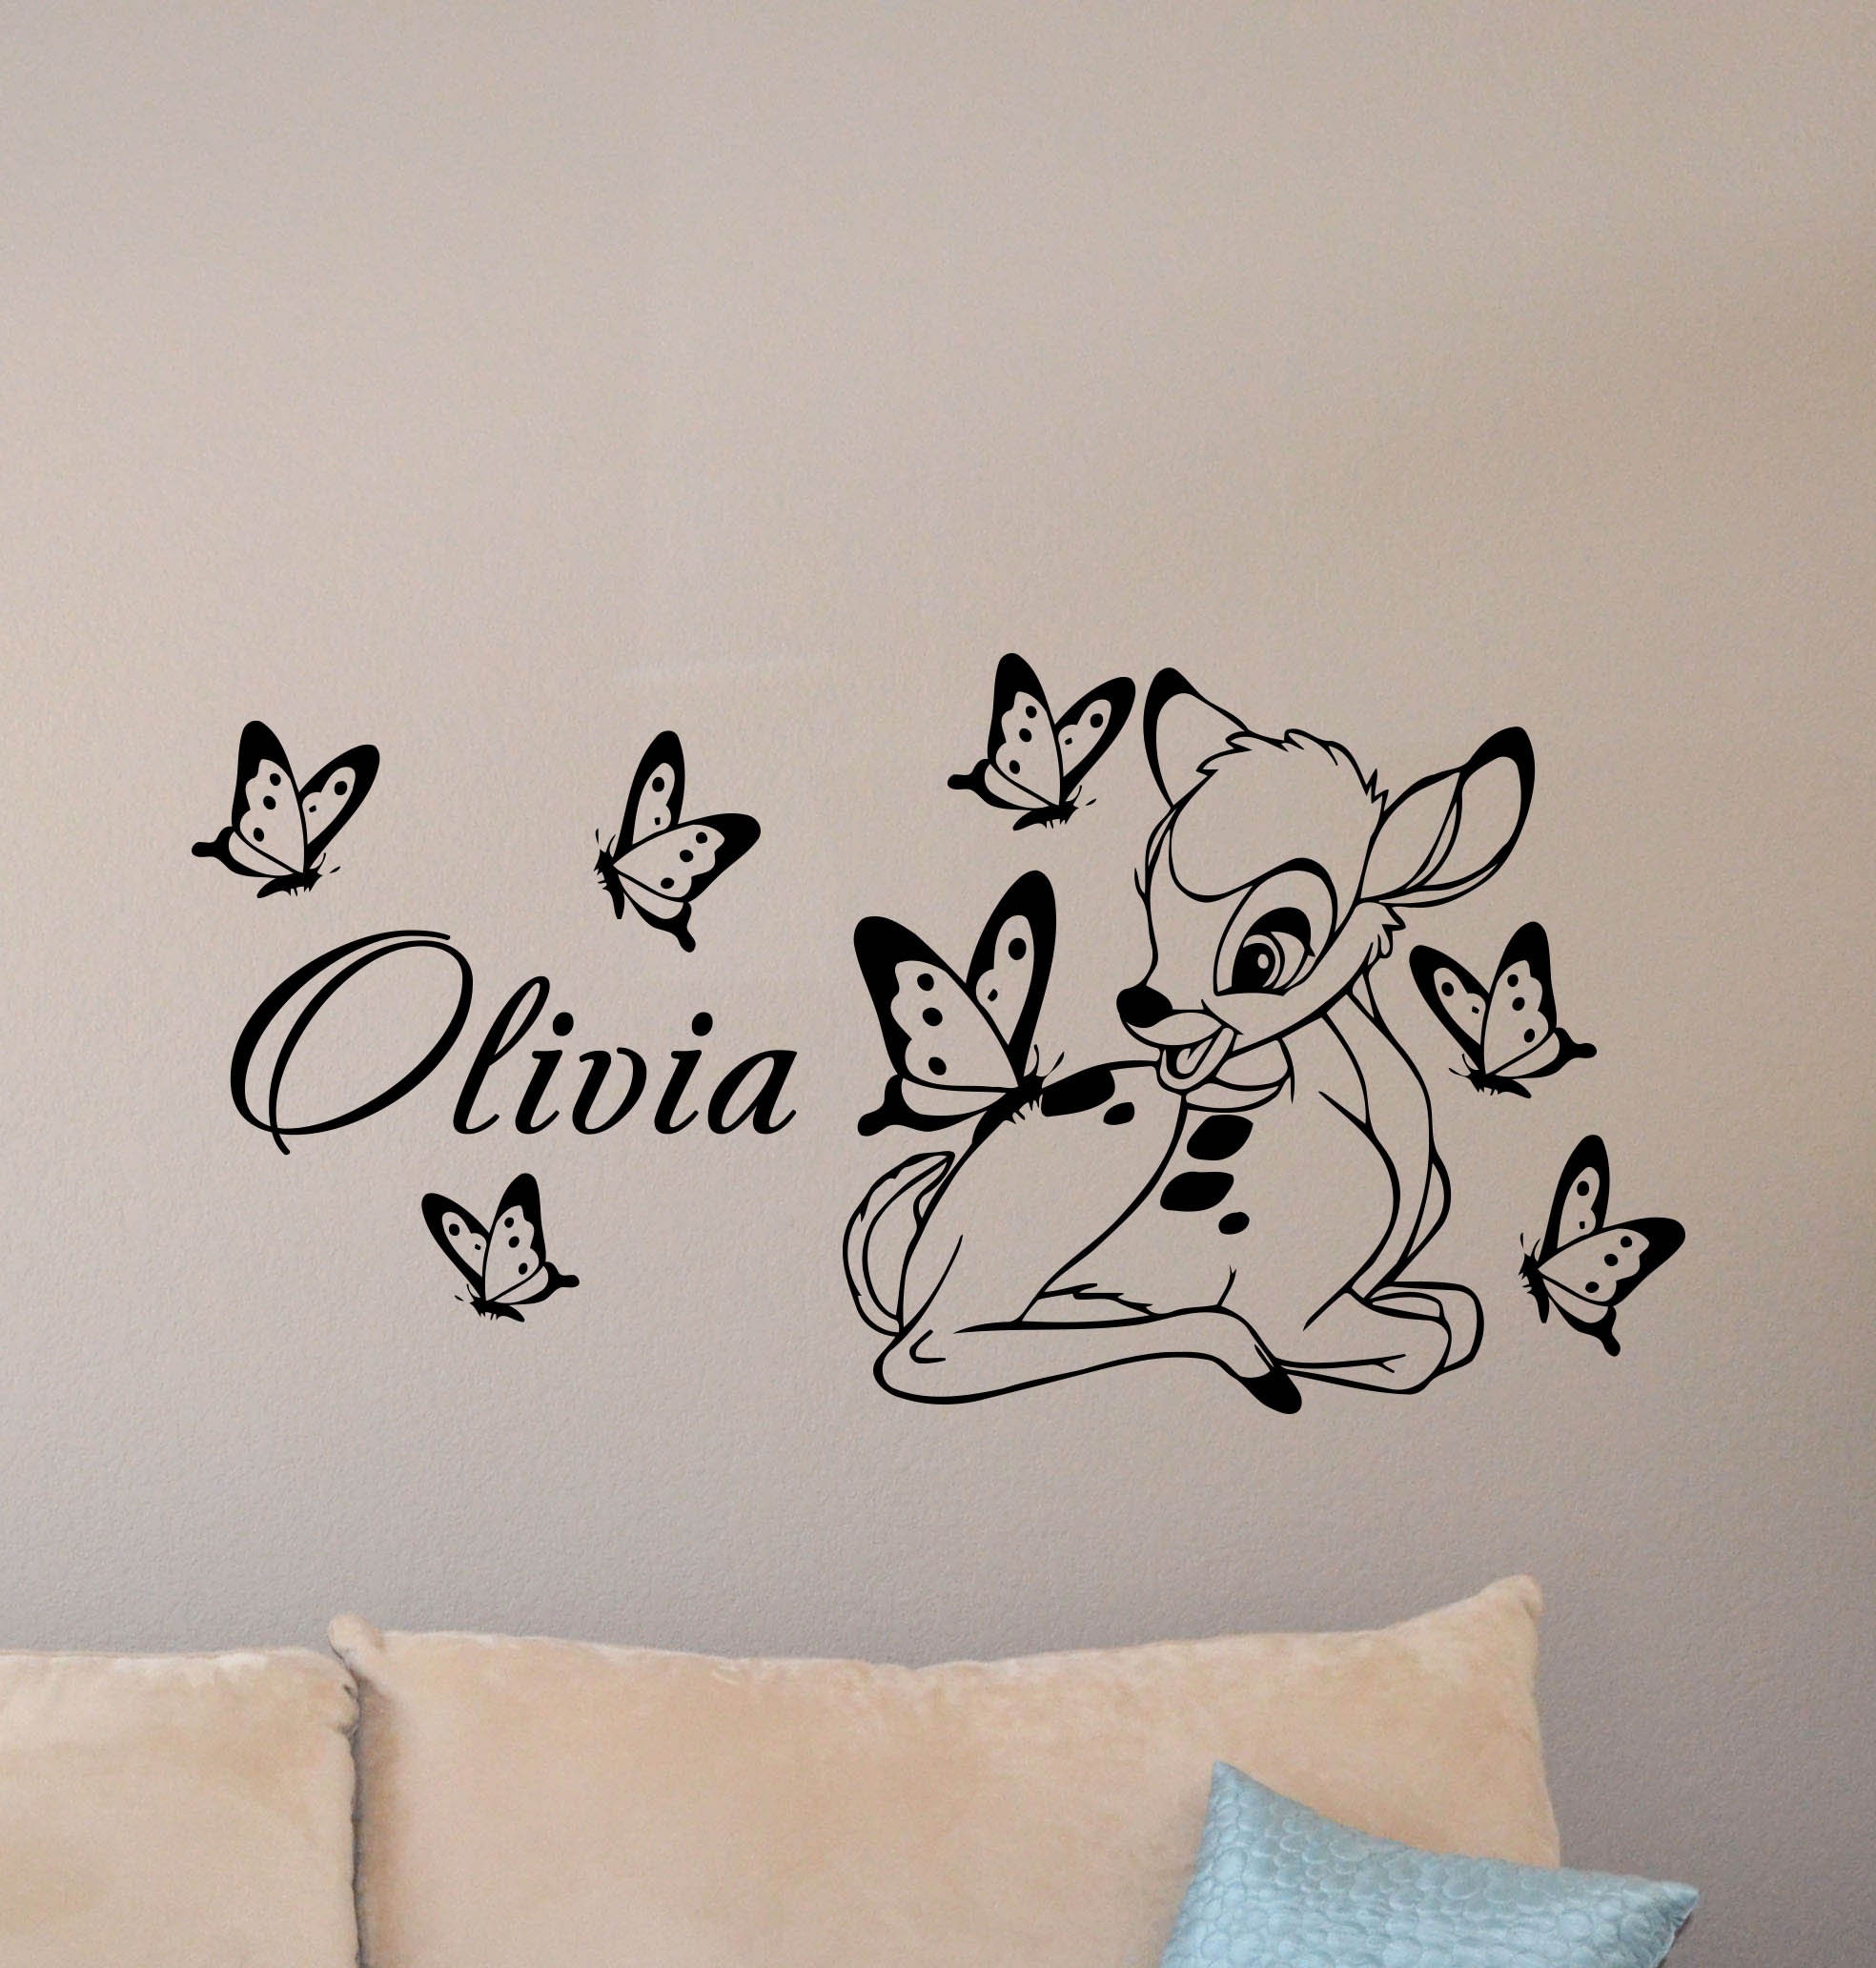 Bambi Wall Decal Personalized Baby Nursery Quote Disney Art Vinyl Gift Decor Room Hong - Sign Kong Name Child Wall Custom Sticker Poster Etsy 4-37 Playroom